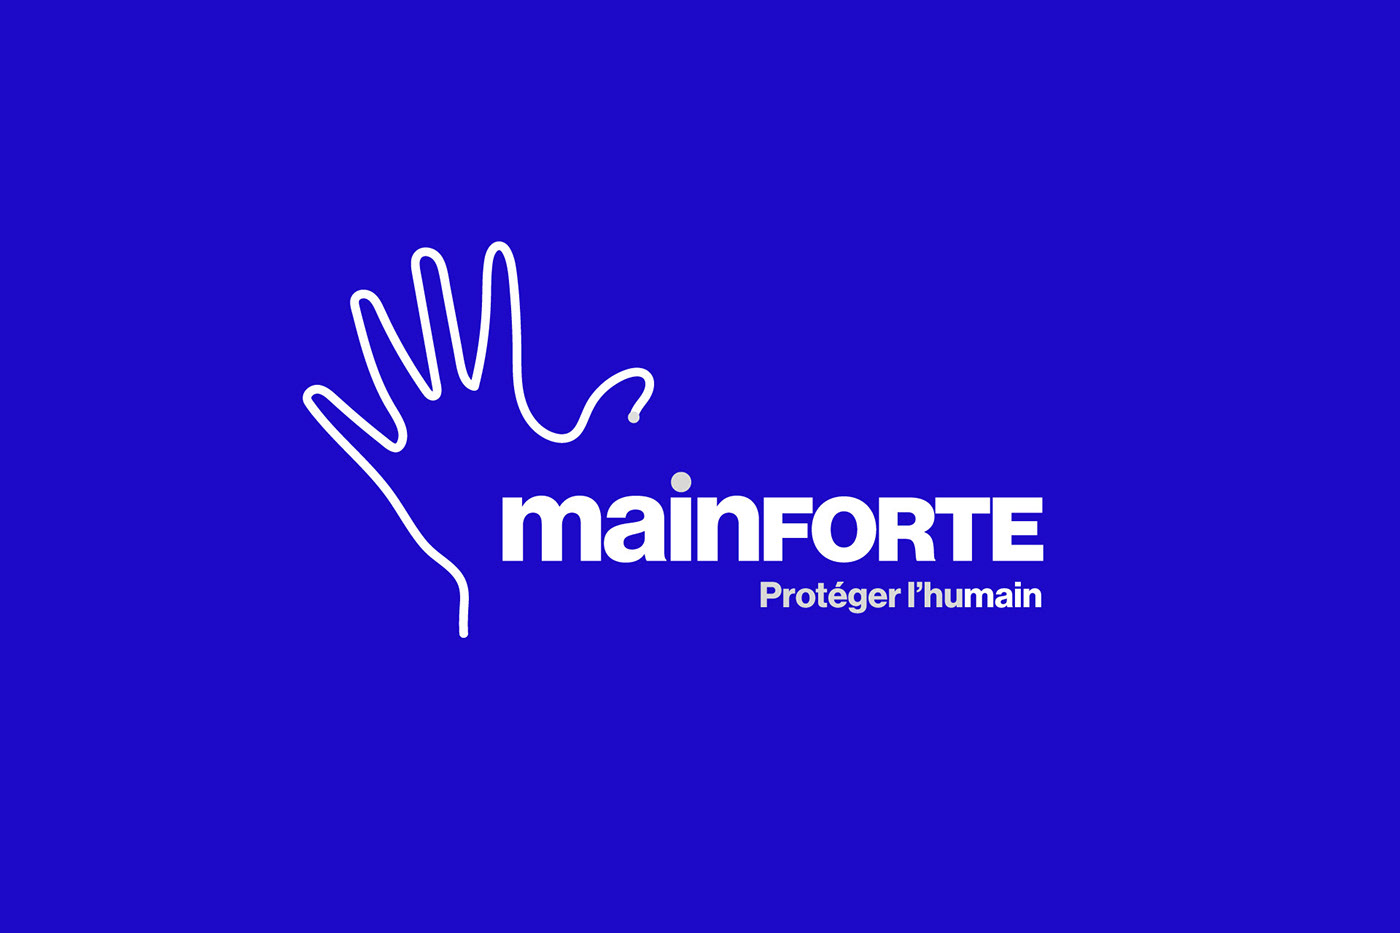 Mainforte is a sanitizer and cleaning product company created by spirit company Duvernois